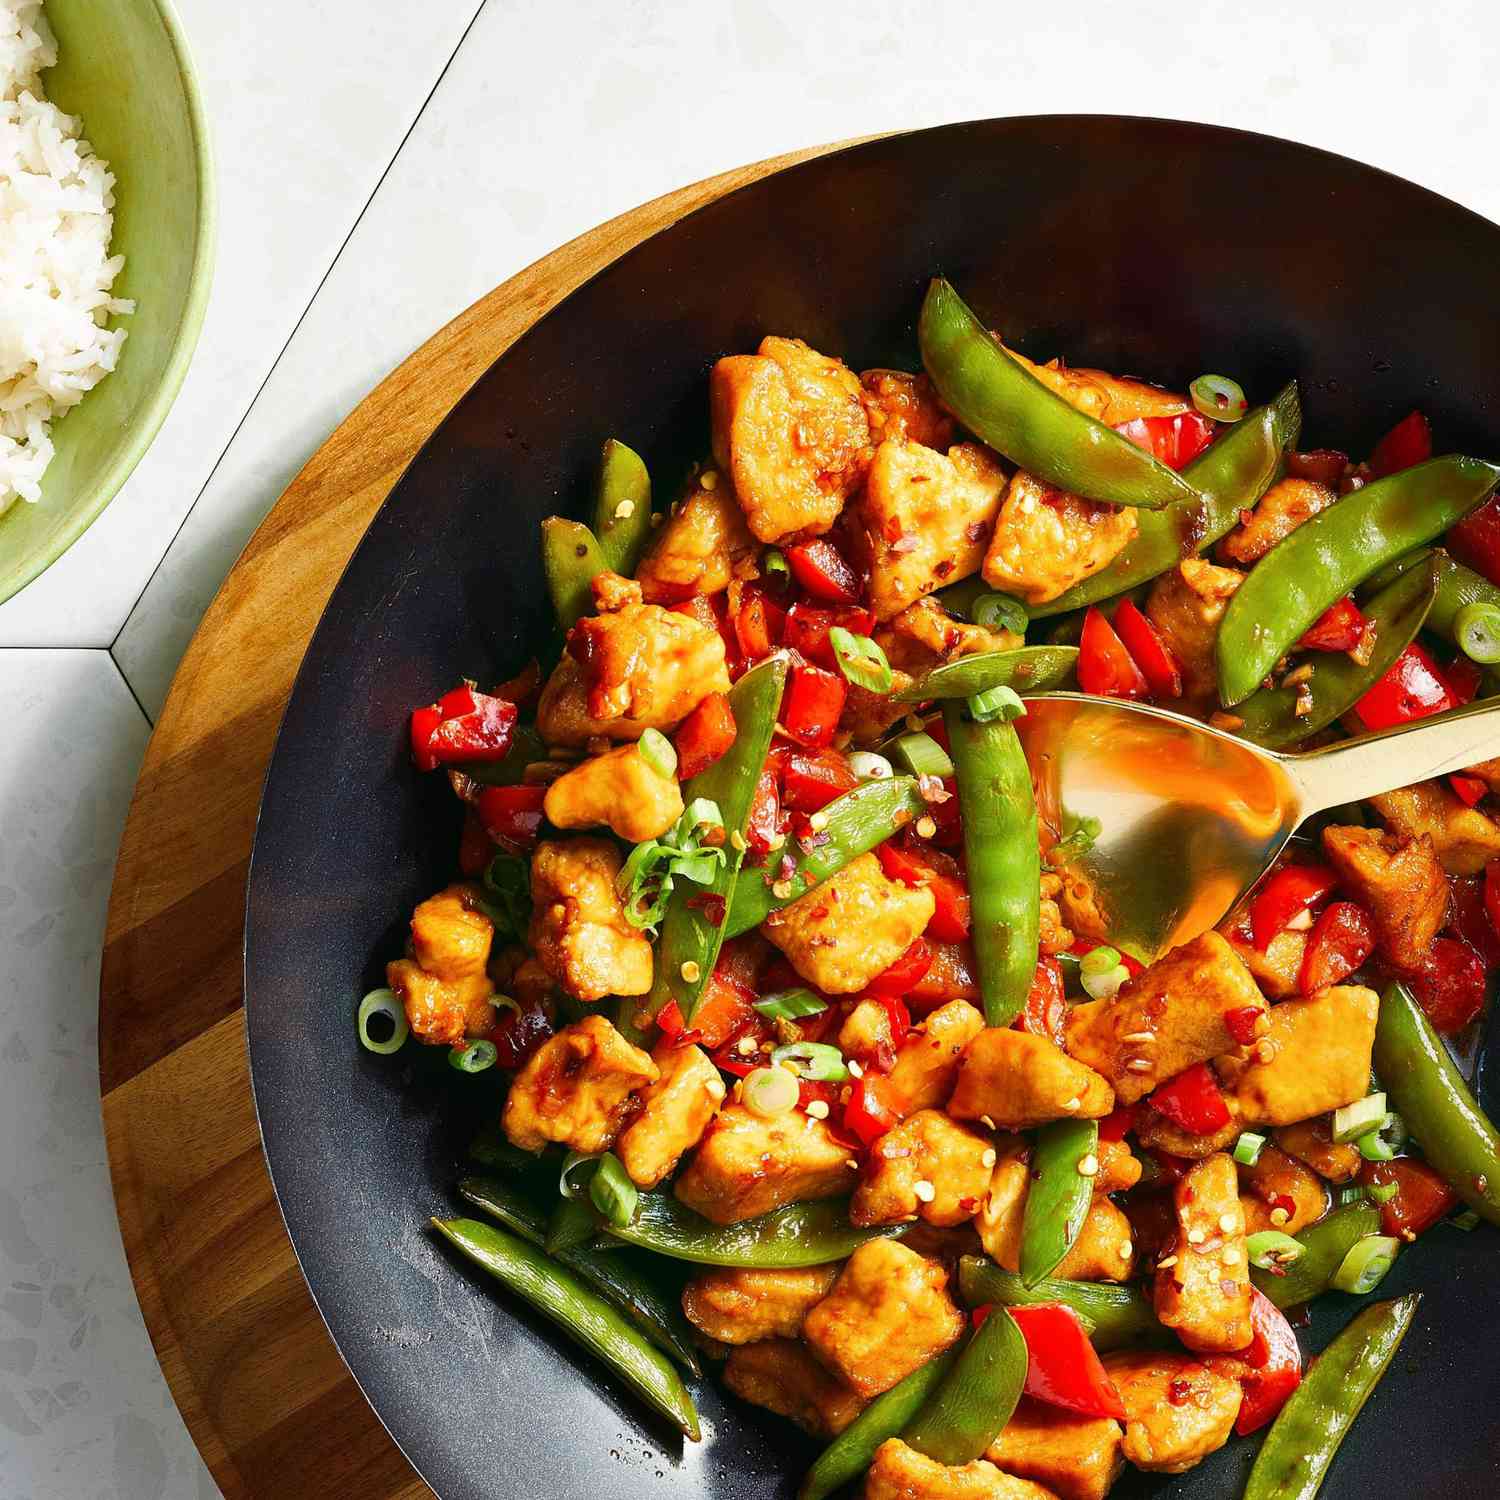 Chicken, peppers, and snap peas stir-fried in a wok